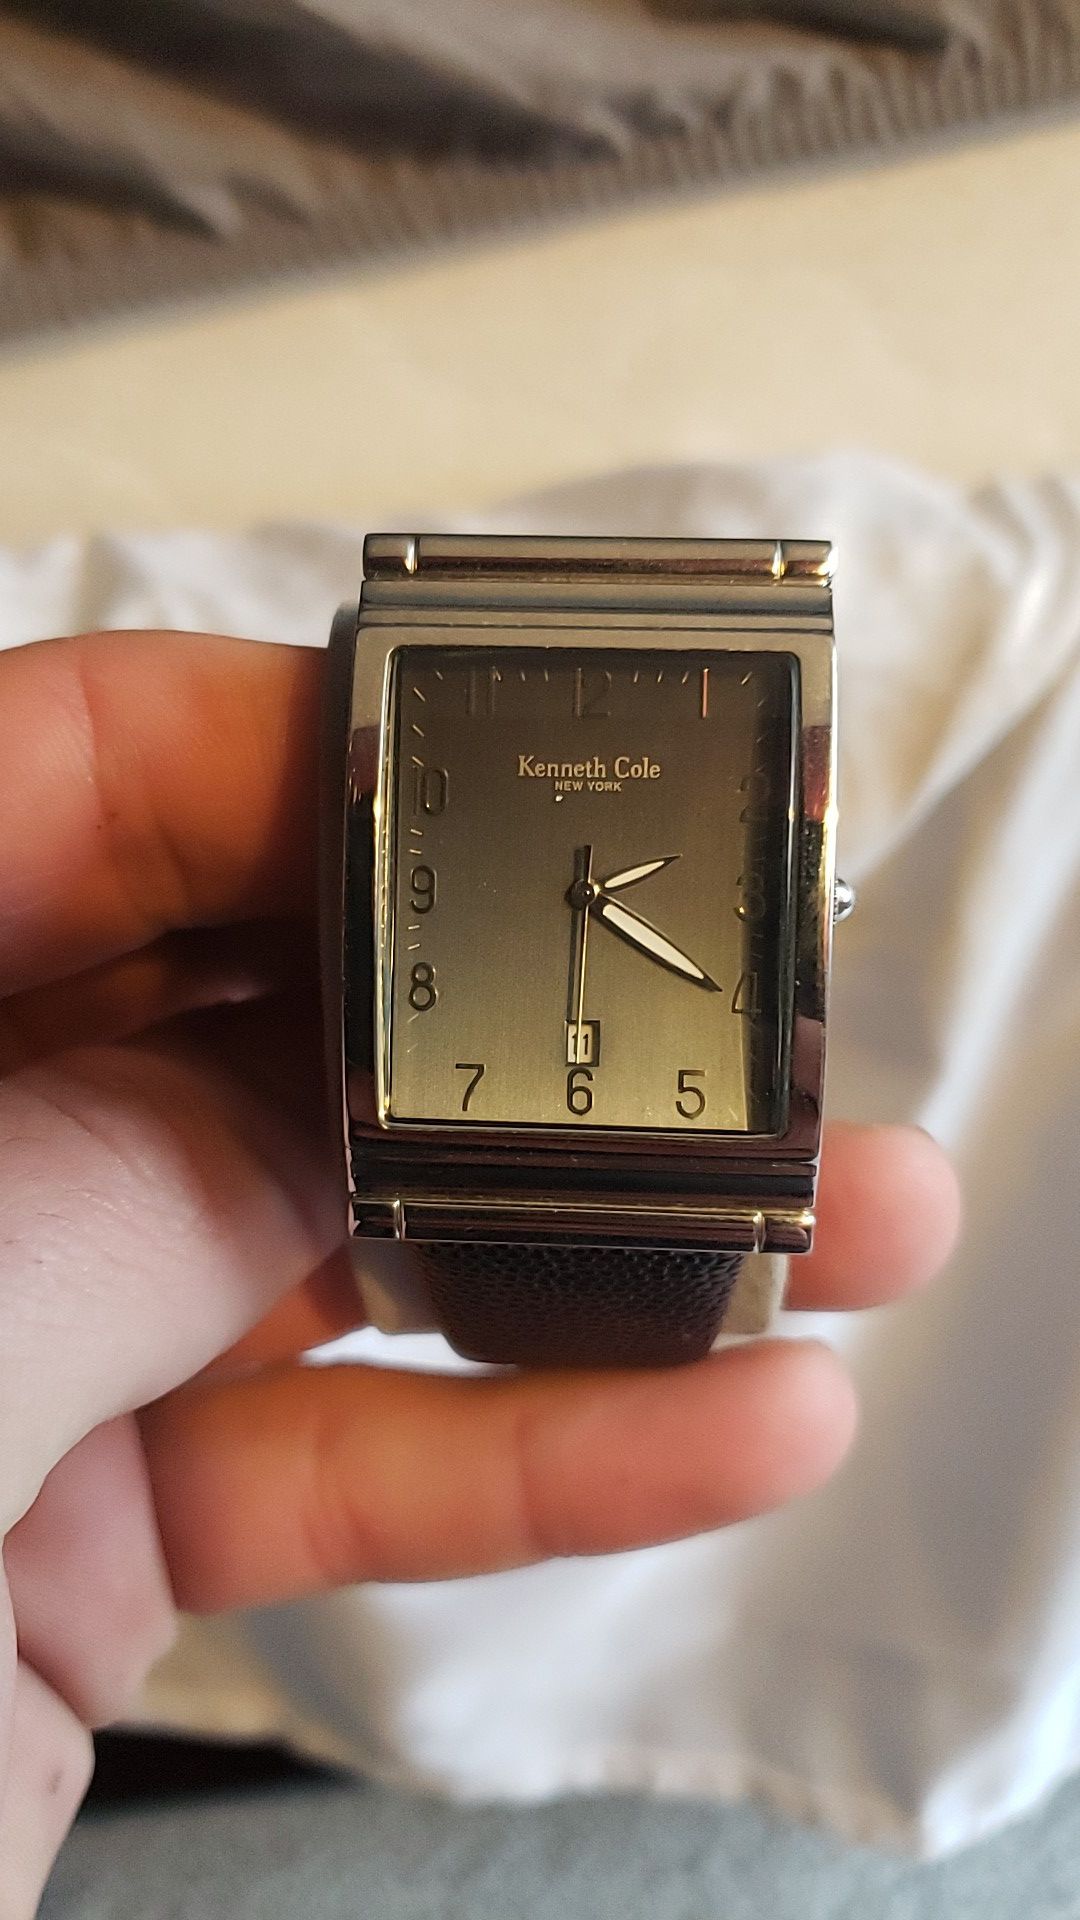 Kenneth cole watch and apple radio